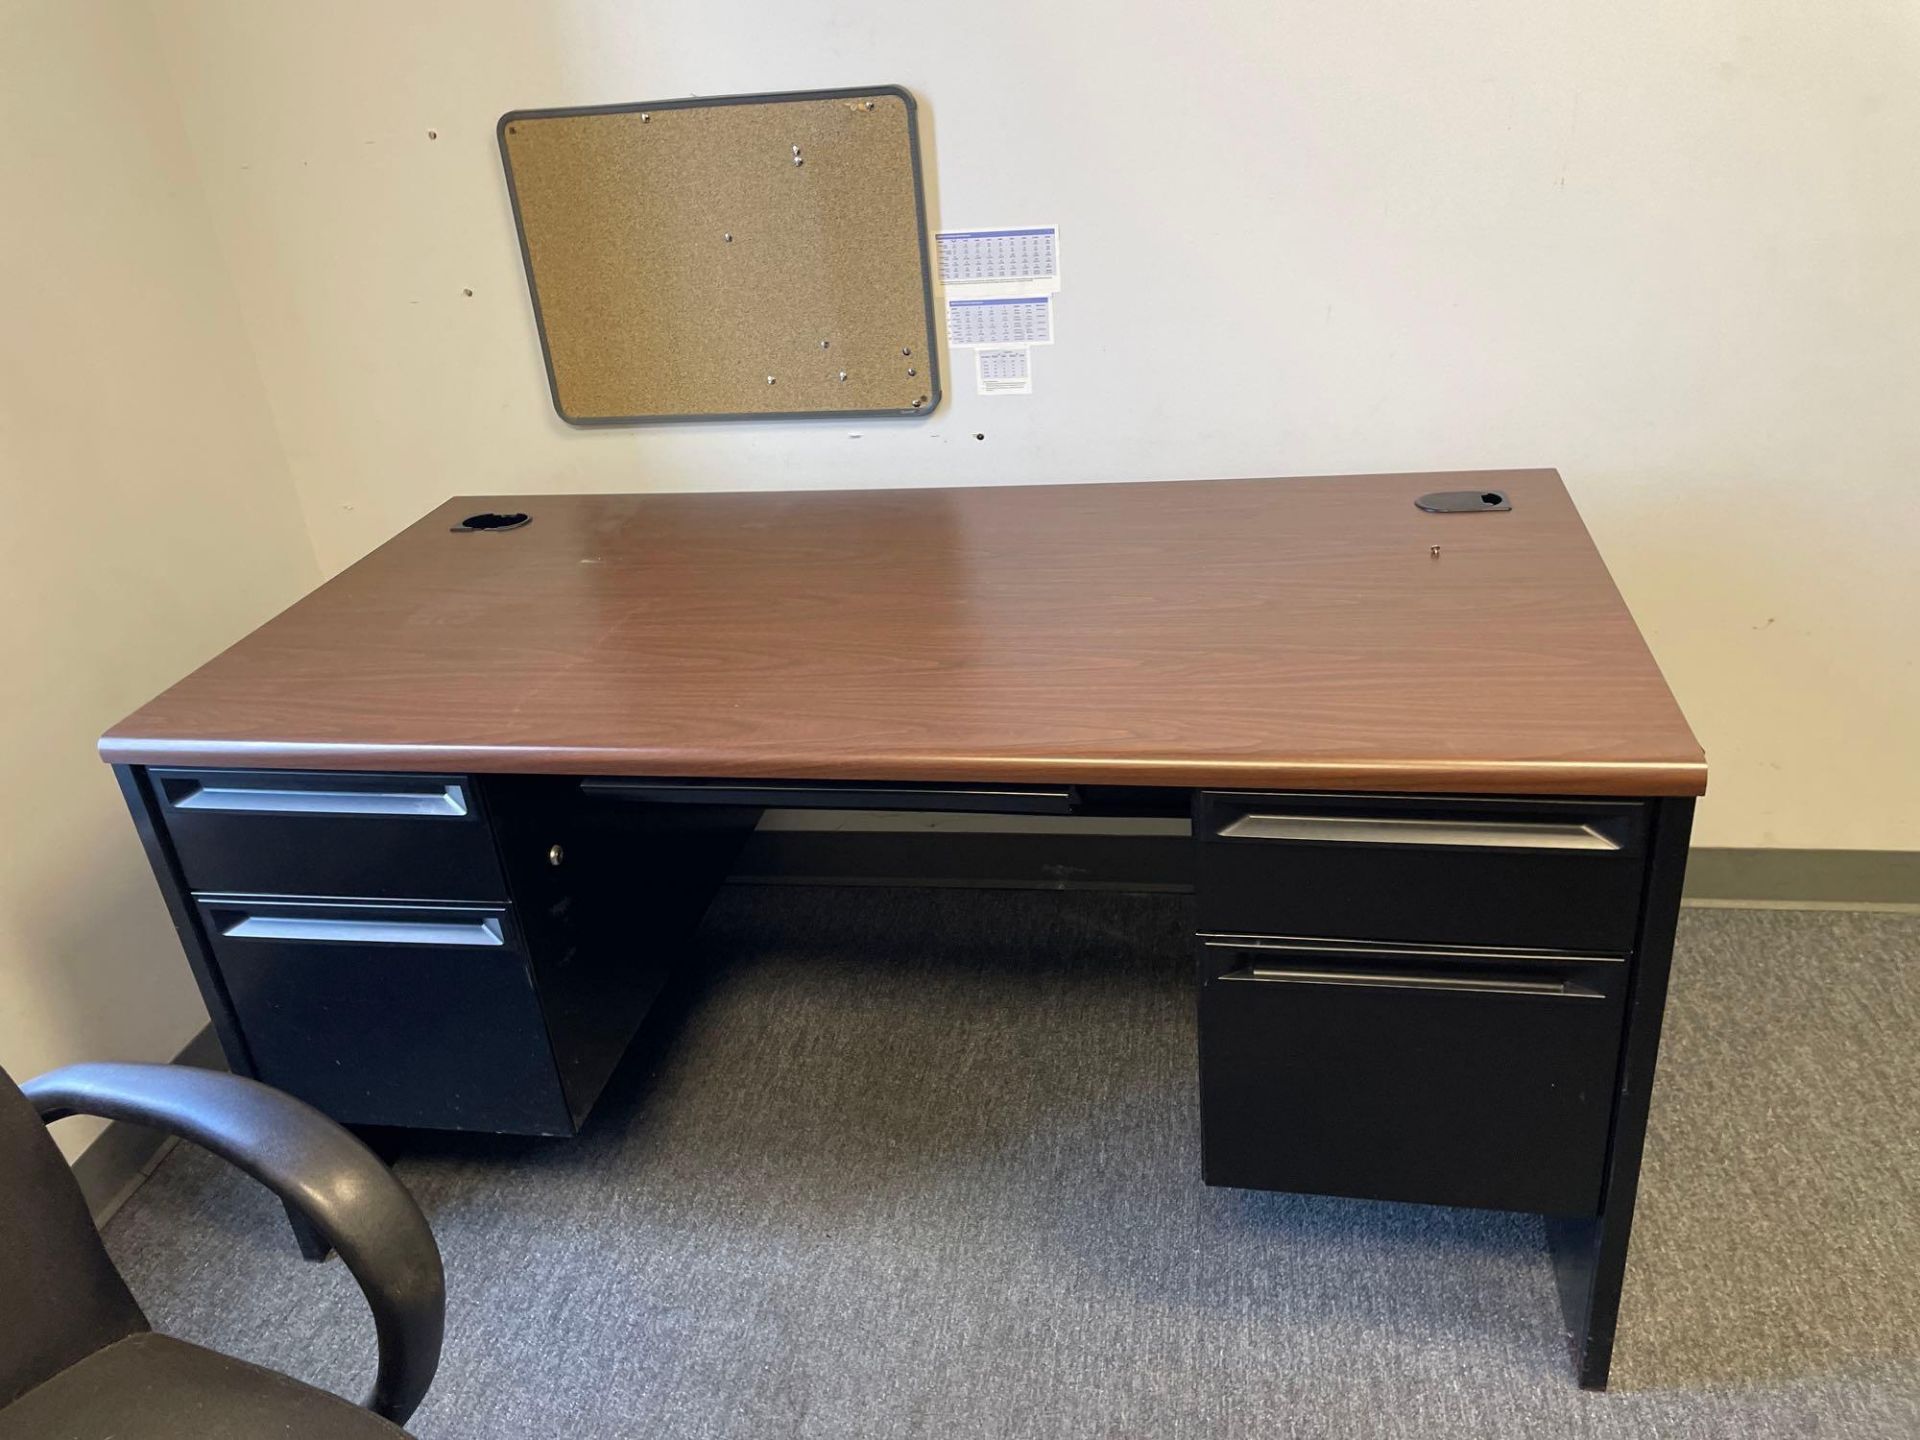 Office Furniture: Rooms 4, 5, 6: Desks, Chairs, Files - See Photo - Image 5 of 9